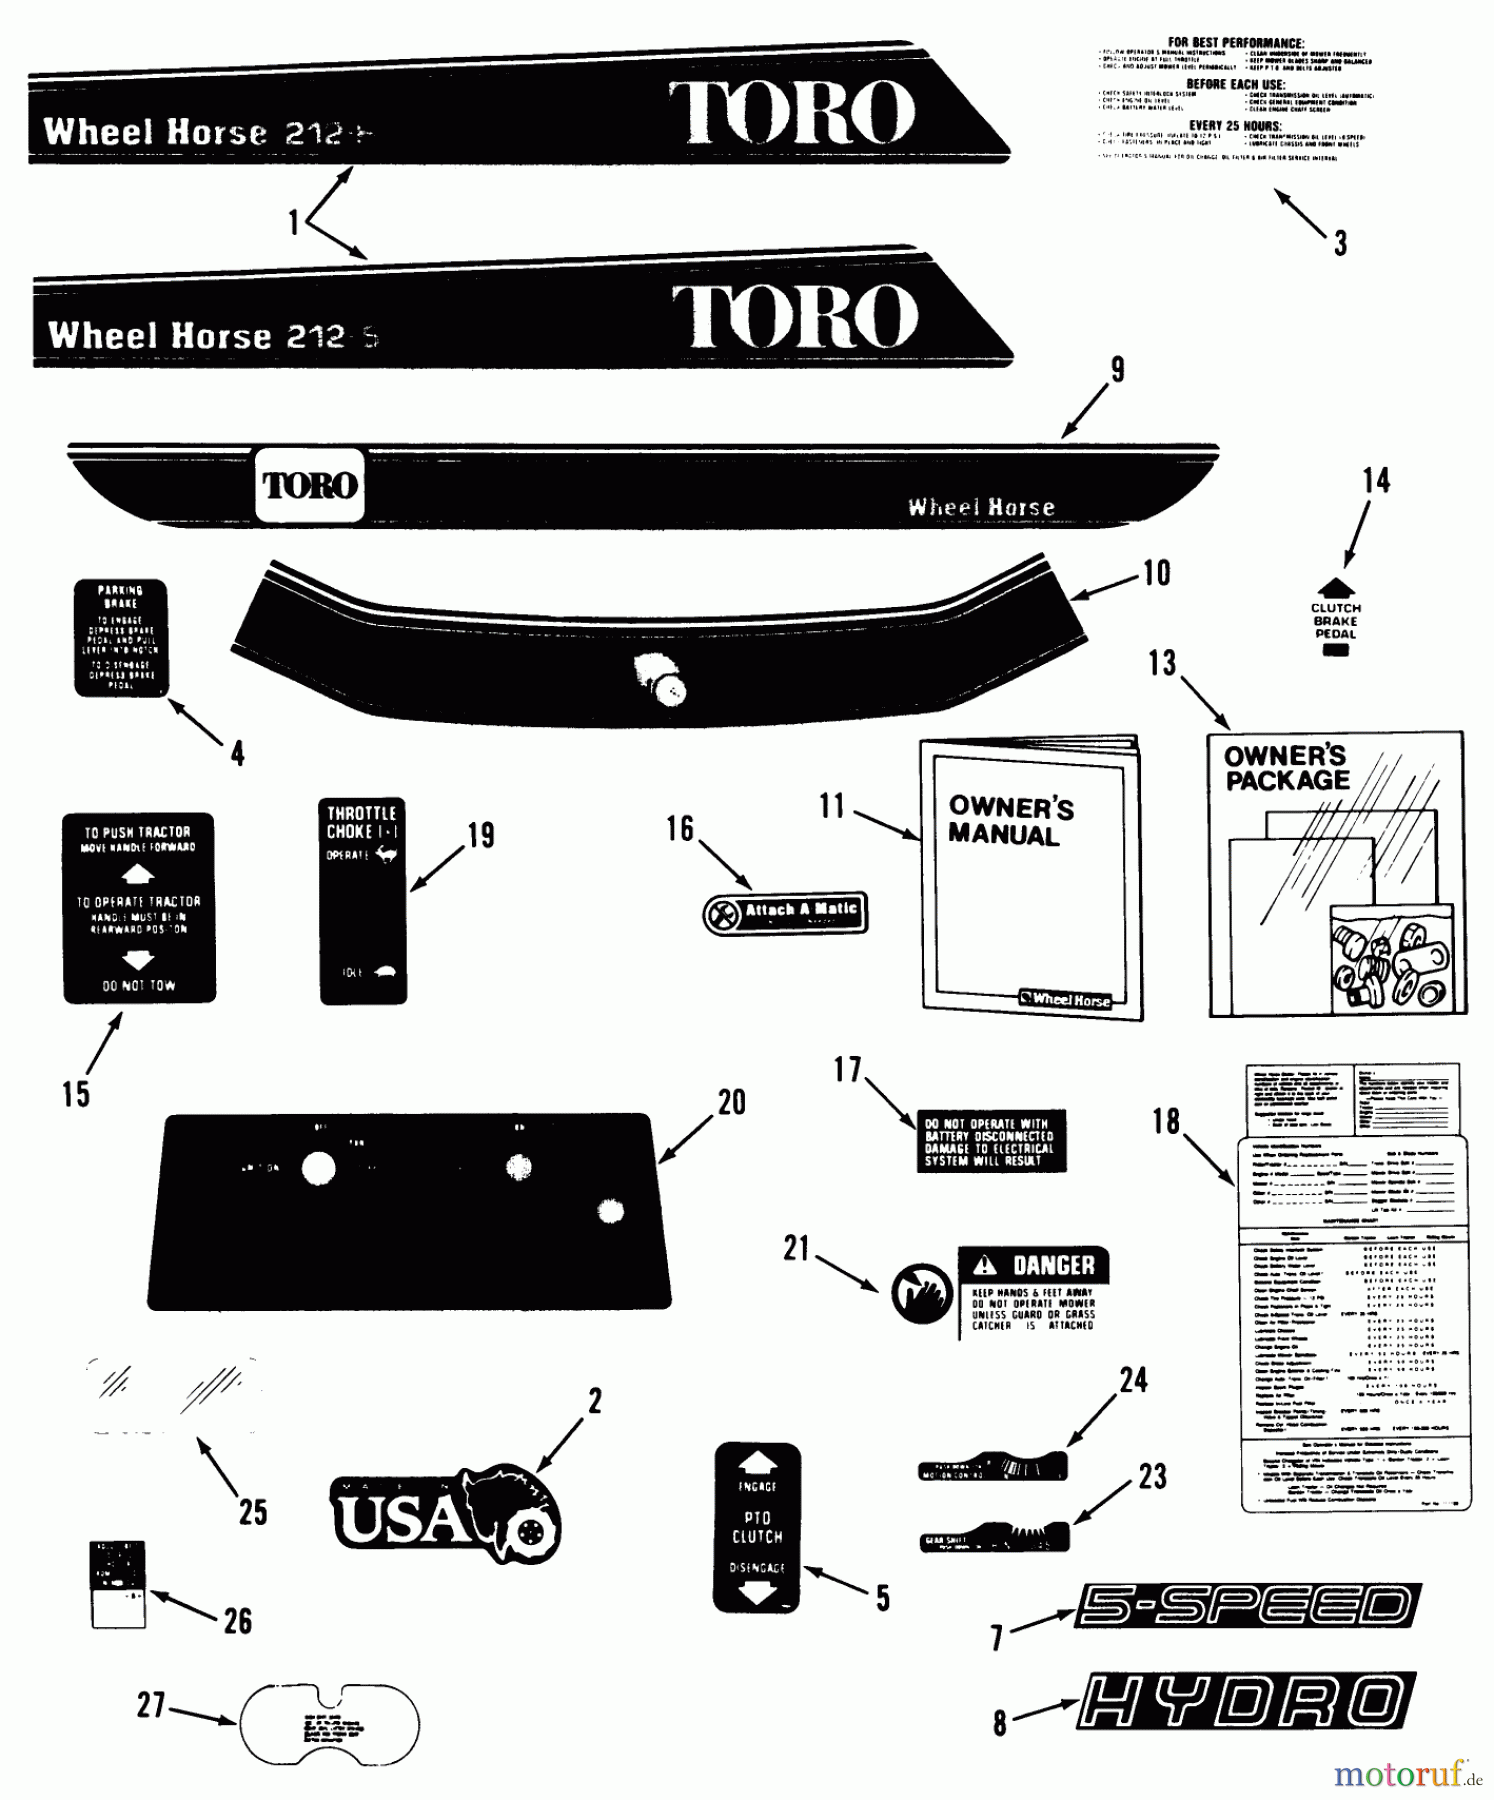  Toro Neu Mowers, Lawn & Garden Tractor Seite 2 A2-12K501 (212-5) - Toro 212-5 Tractor, 1991 (1000001-1999999) DECAL & MISCELLANEOUS PARTS ASSEMBLY